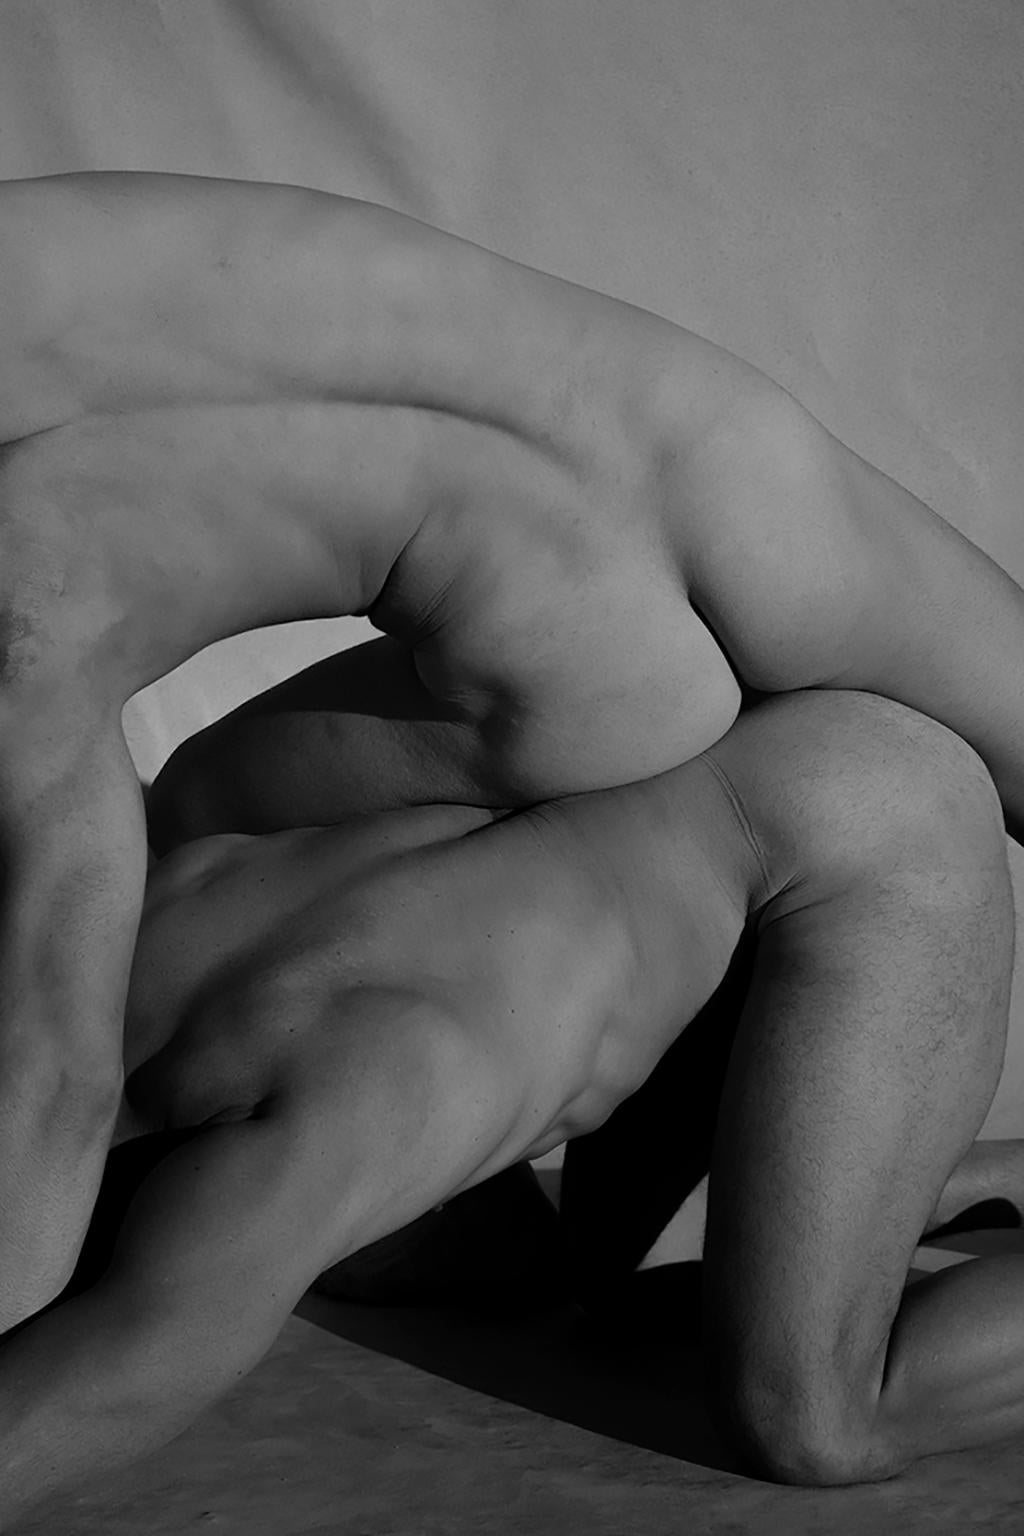 Ricky Cohete Nude Photograph - Cerro II. Cerros series. Male Nudes Black and White limited edition photograph